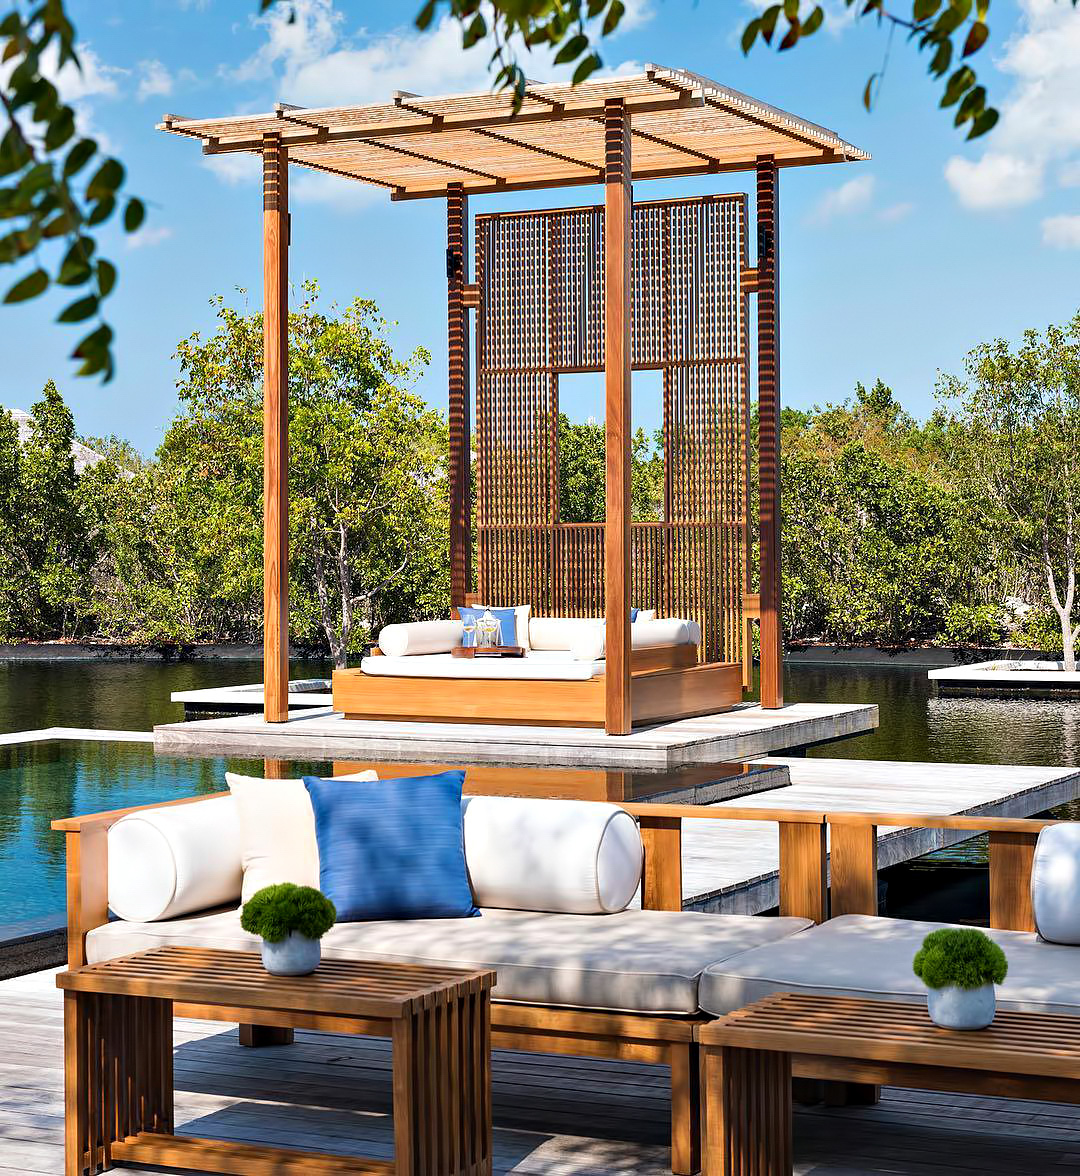 Amanyara Resort - Providenciales, Turks and Caicos Islands - 4 Bedroom Tranquility Villa Infinity Pool Lounge Chairs